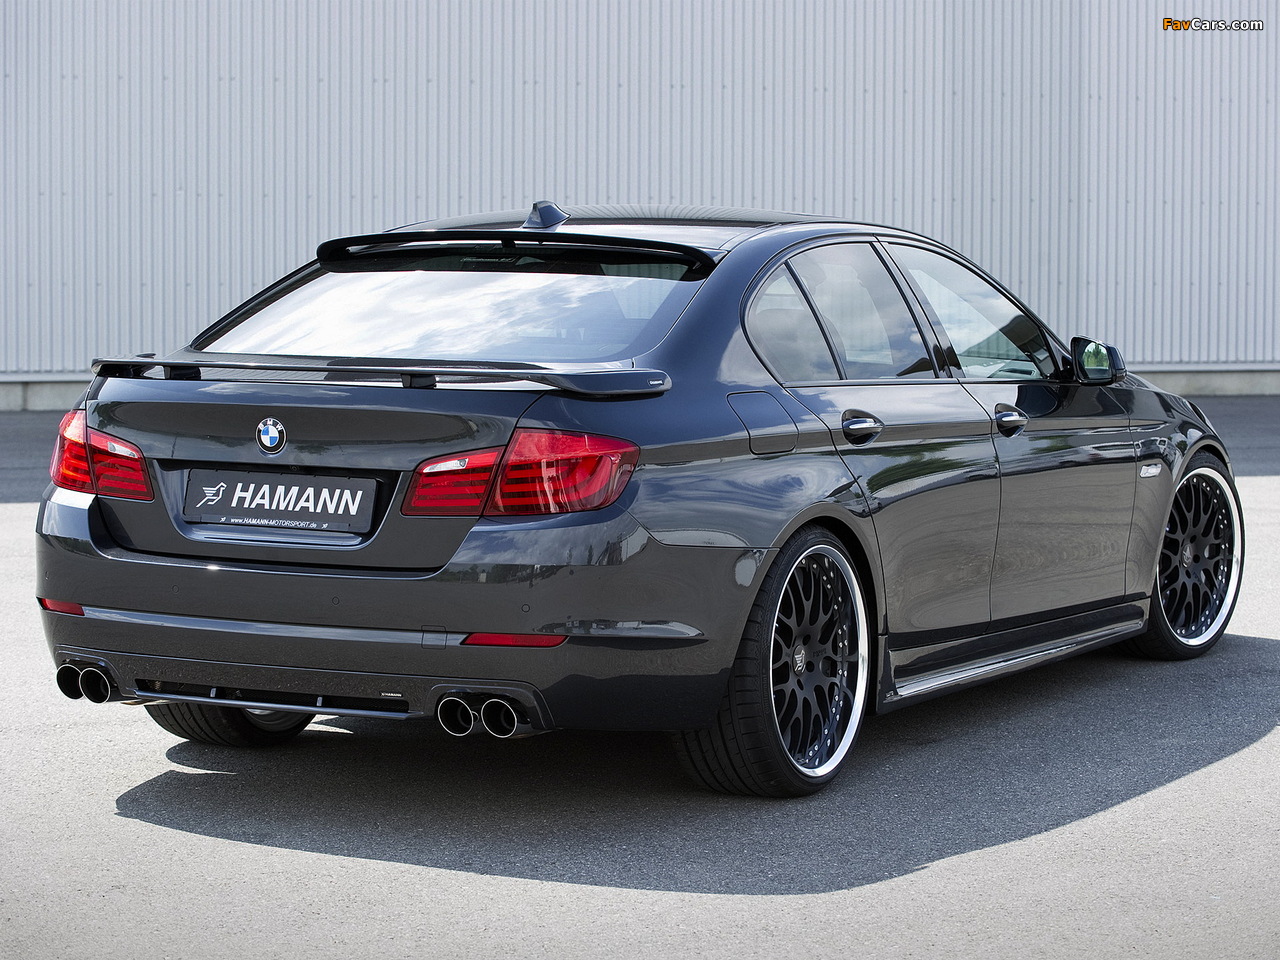 Hamann BMW 5 Series (F10) 2010 pictures (1280 x 960)